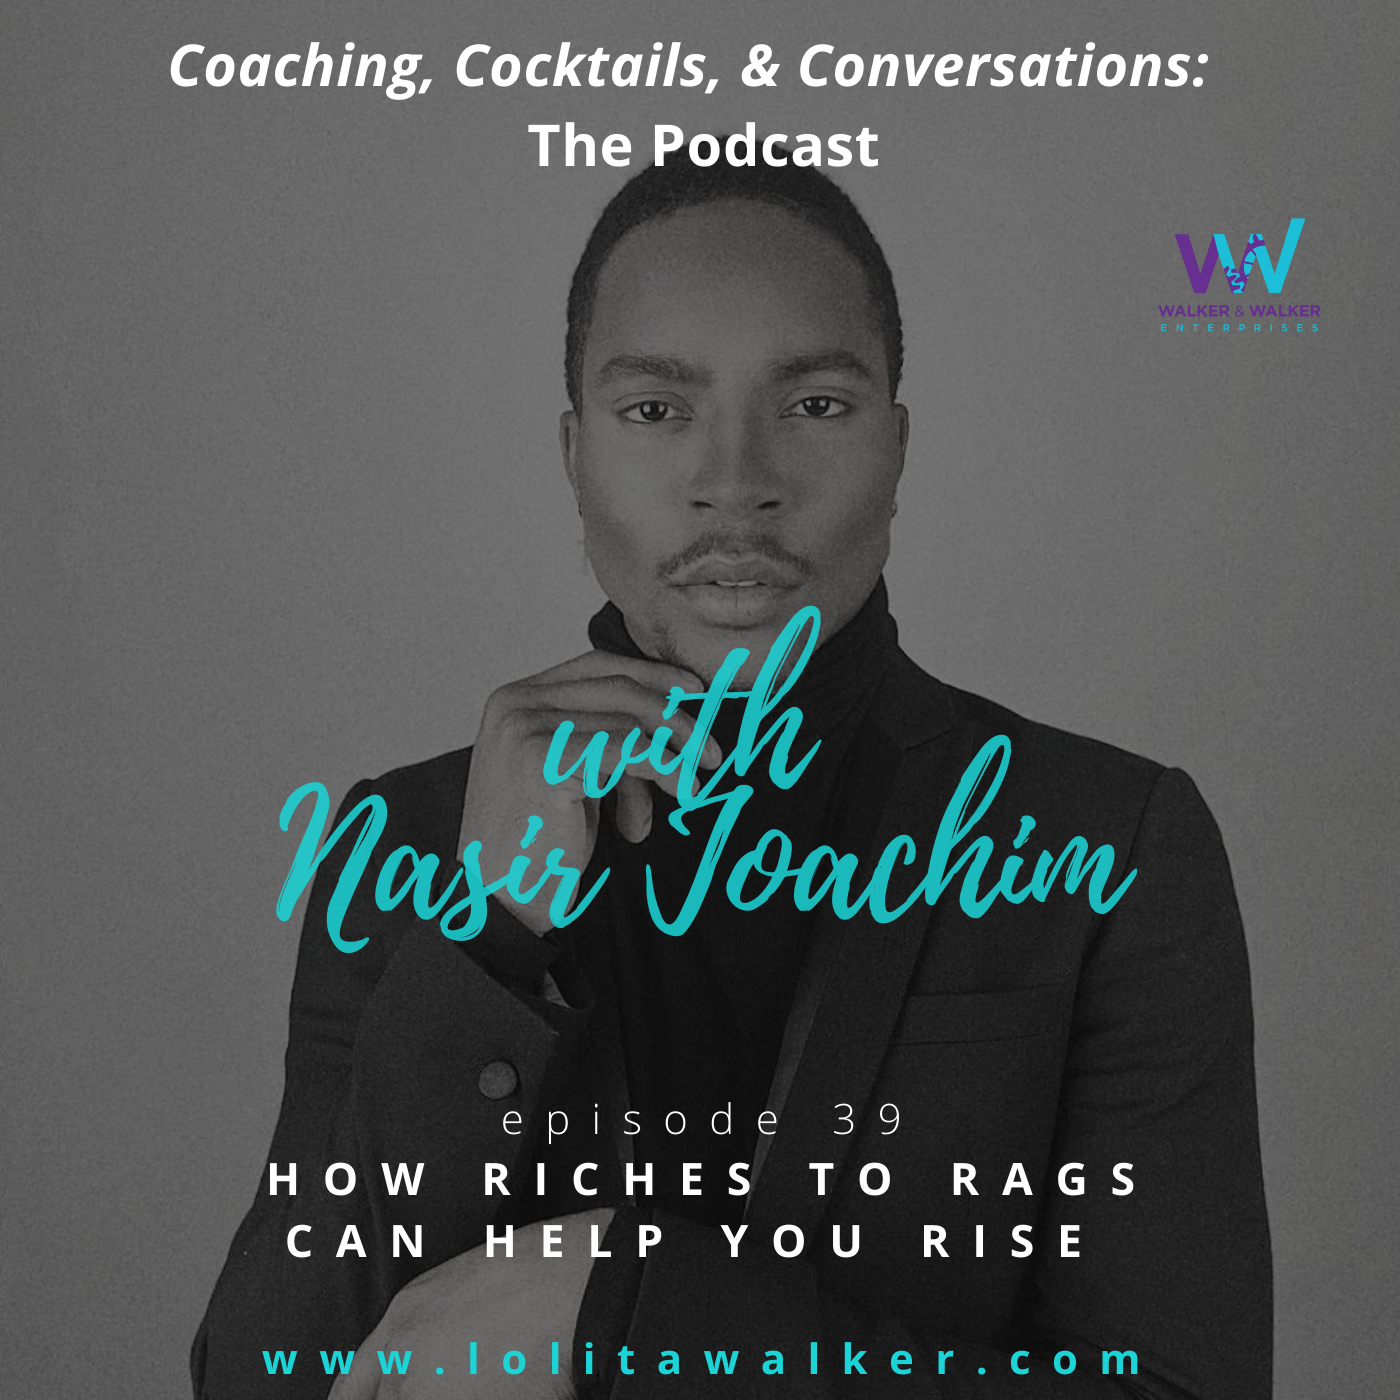 S2E39 - How Riches to Rags Will Help You Rise (with Nasir Joachim)